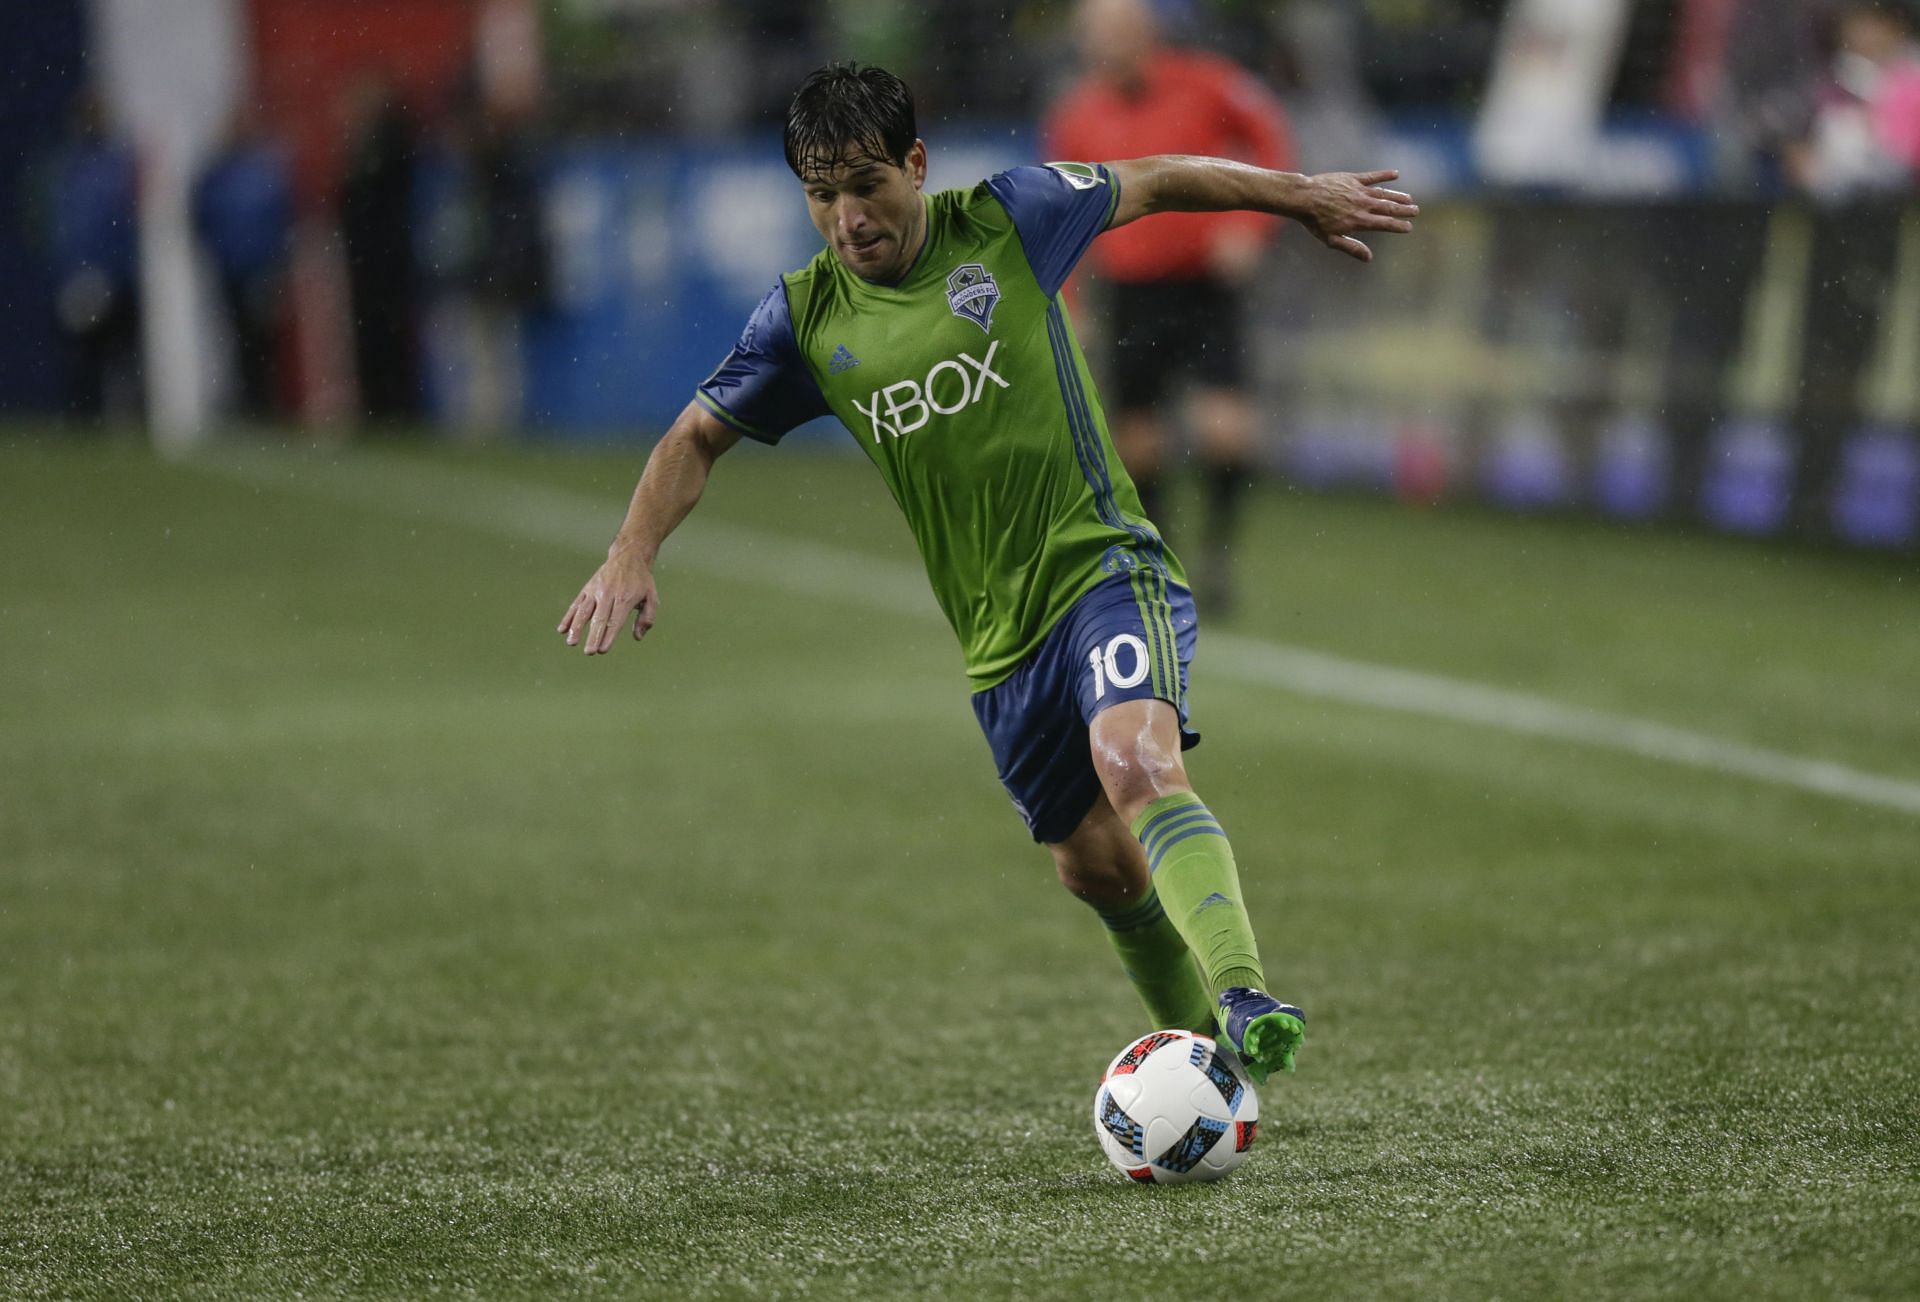 Colorado Rapids play host to Seattle Sounders on Tuesday